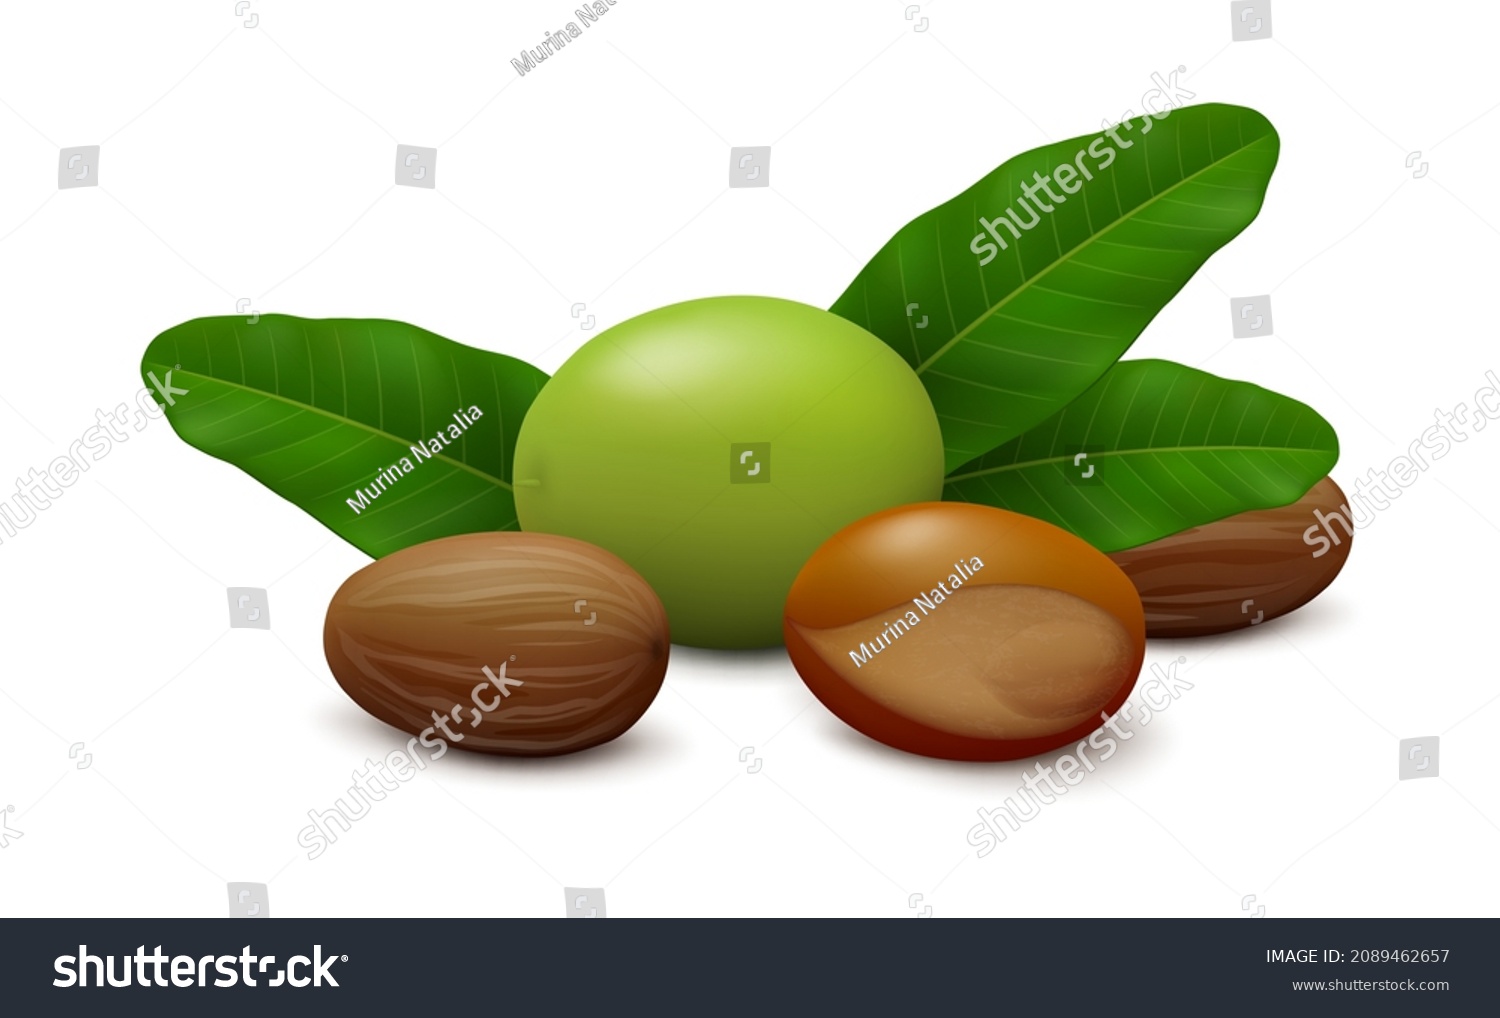 SVG of Lying down green shea (Vitellaria paradoxa) fruit, three leaves, two shelled seeds and unshelled nut isolated on white background. Side view. Realistic vector illustration. svg